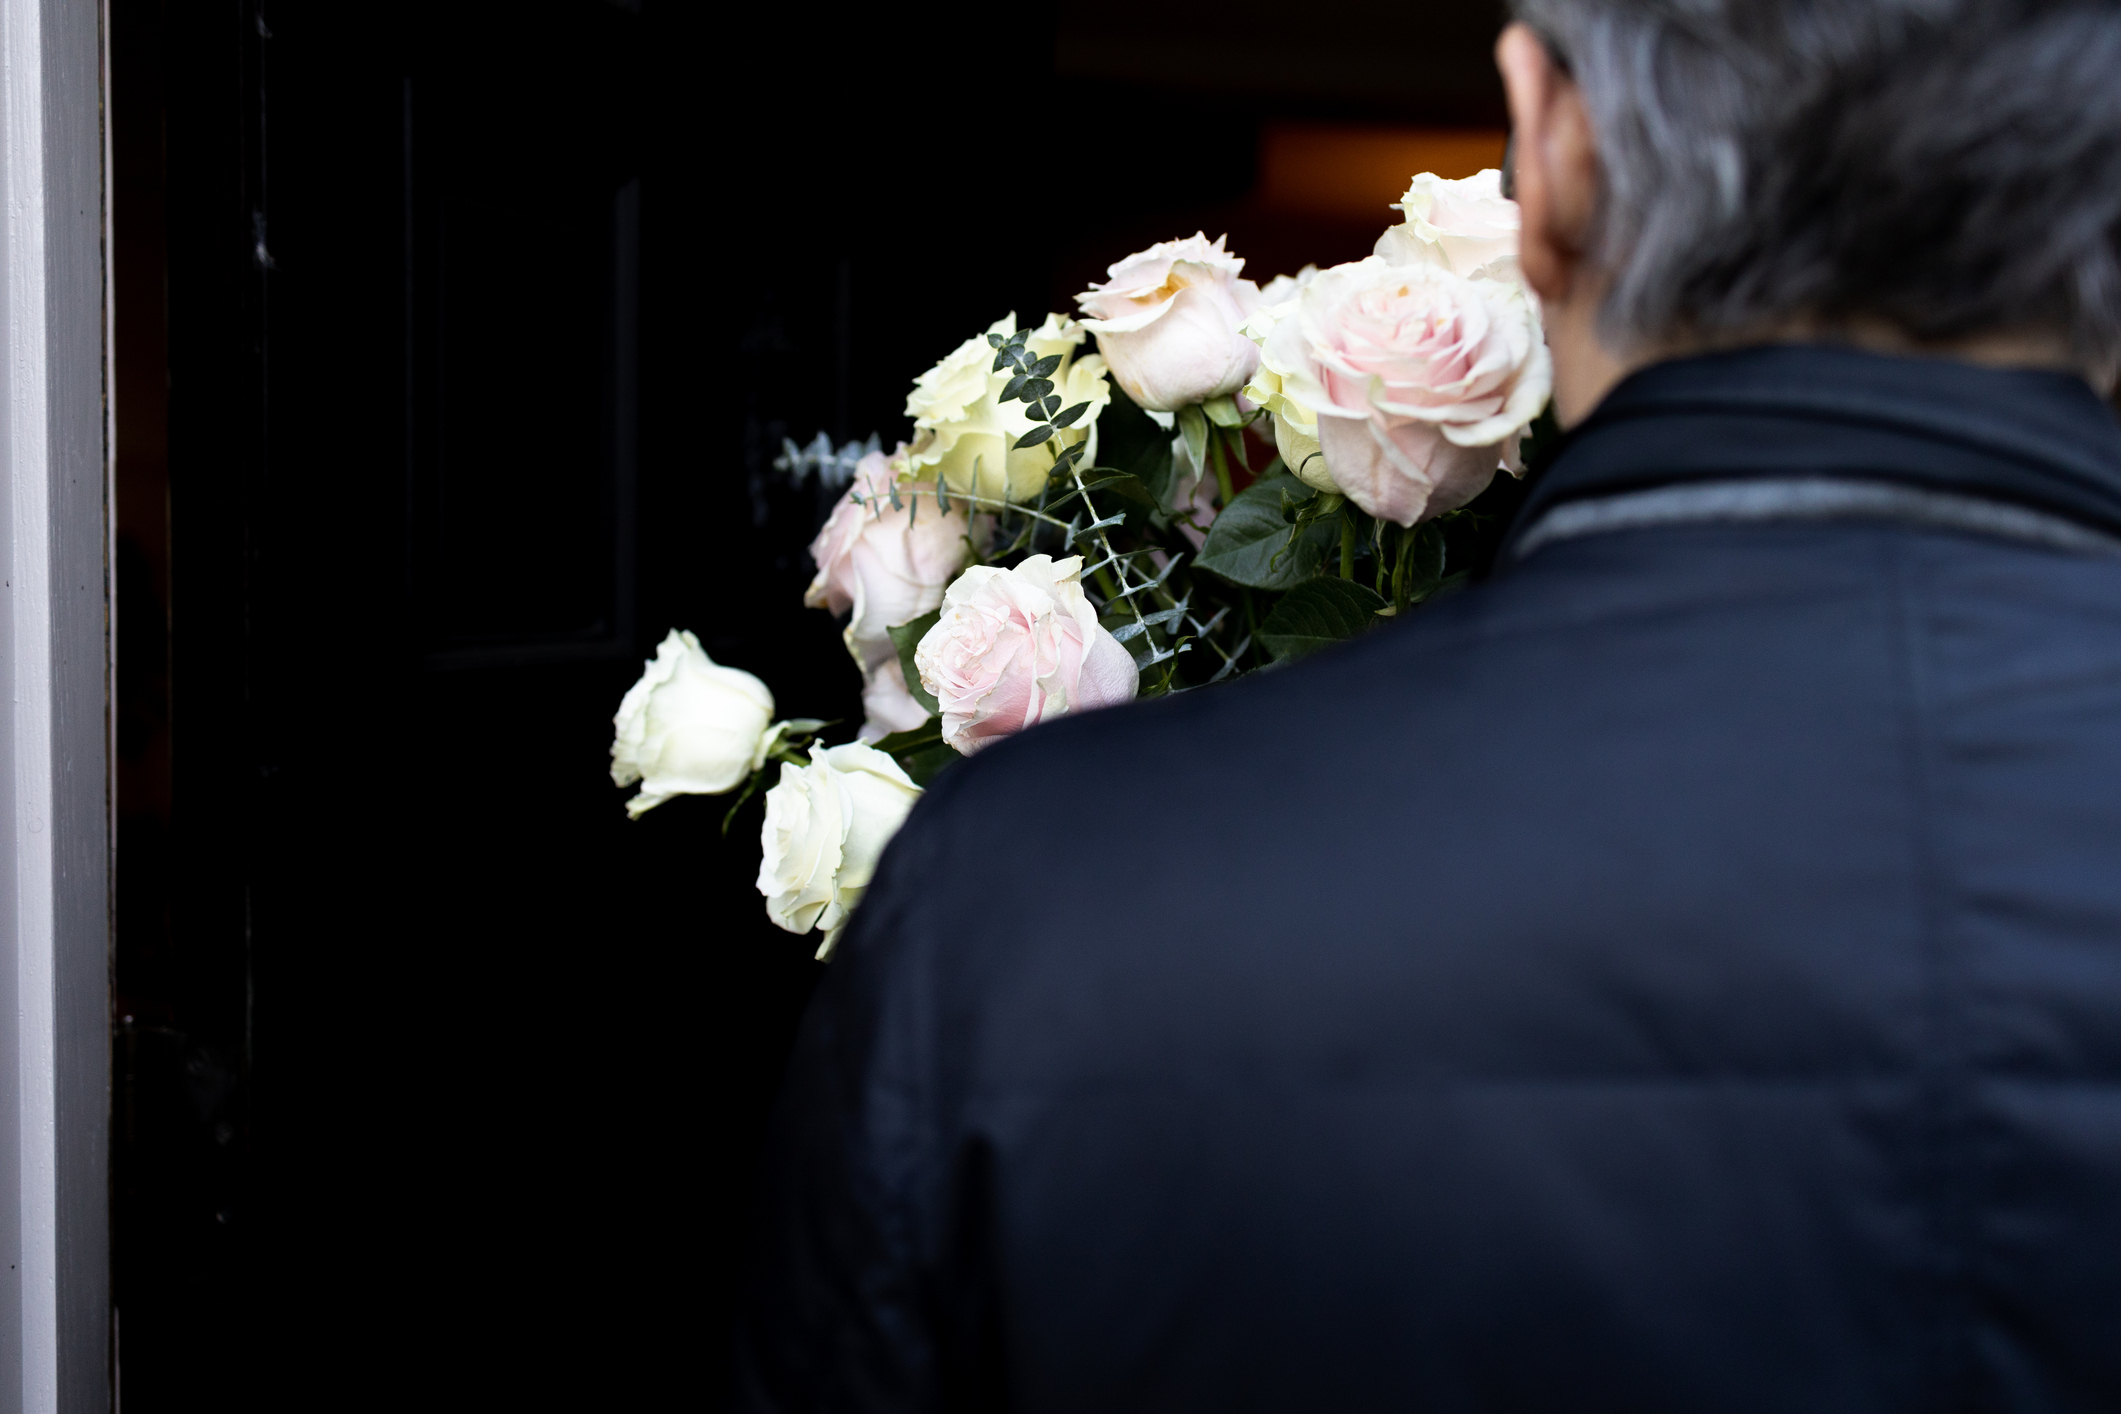 Person holding a bouquet of roses at a doorstep, implying a romantic gesture